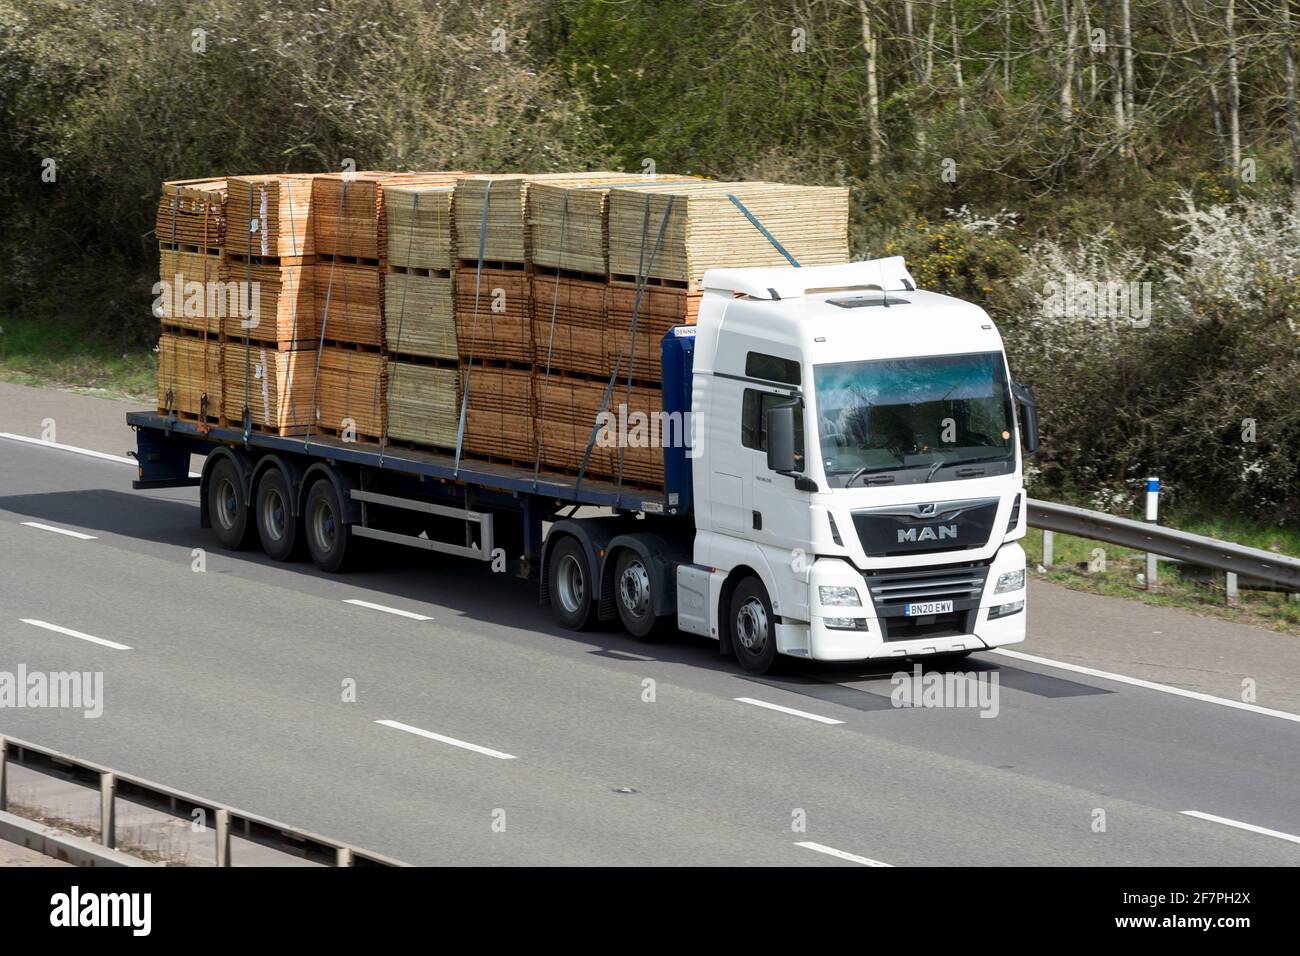 A MAN lorry carrying fencing panels on the M40 motorway, Warwickshire, UK Stock Photo